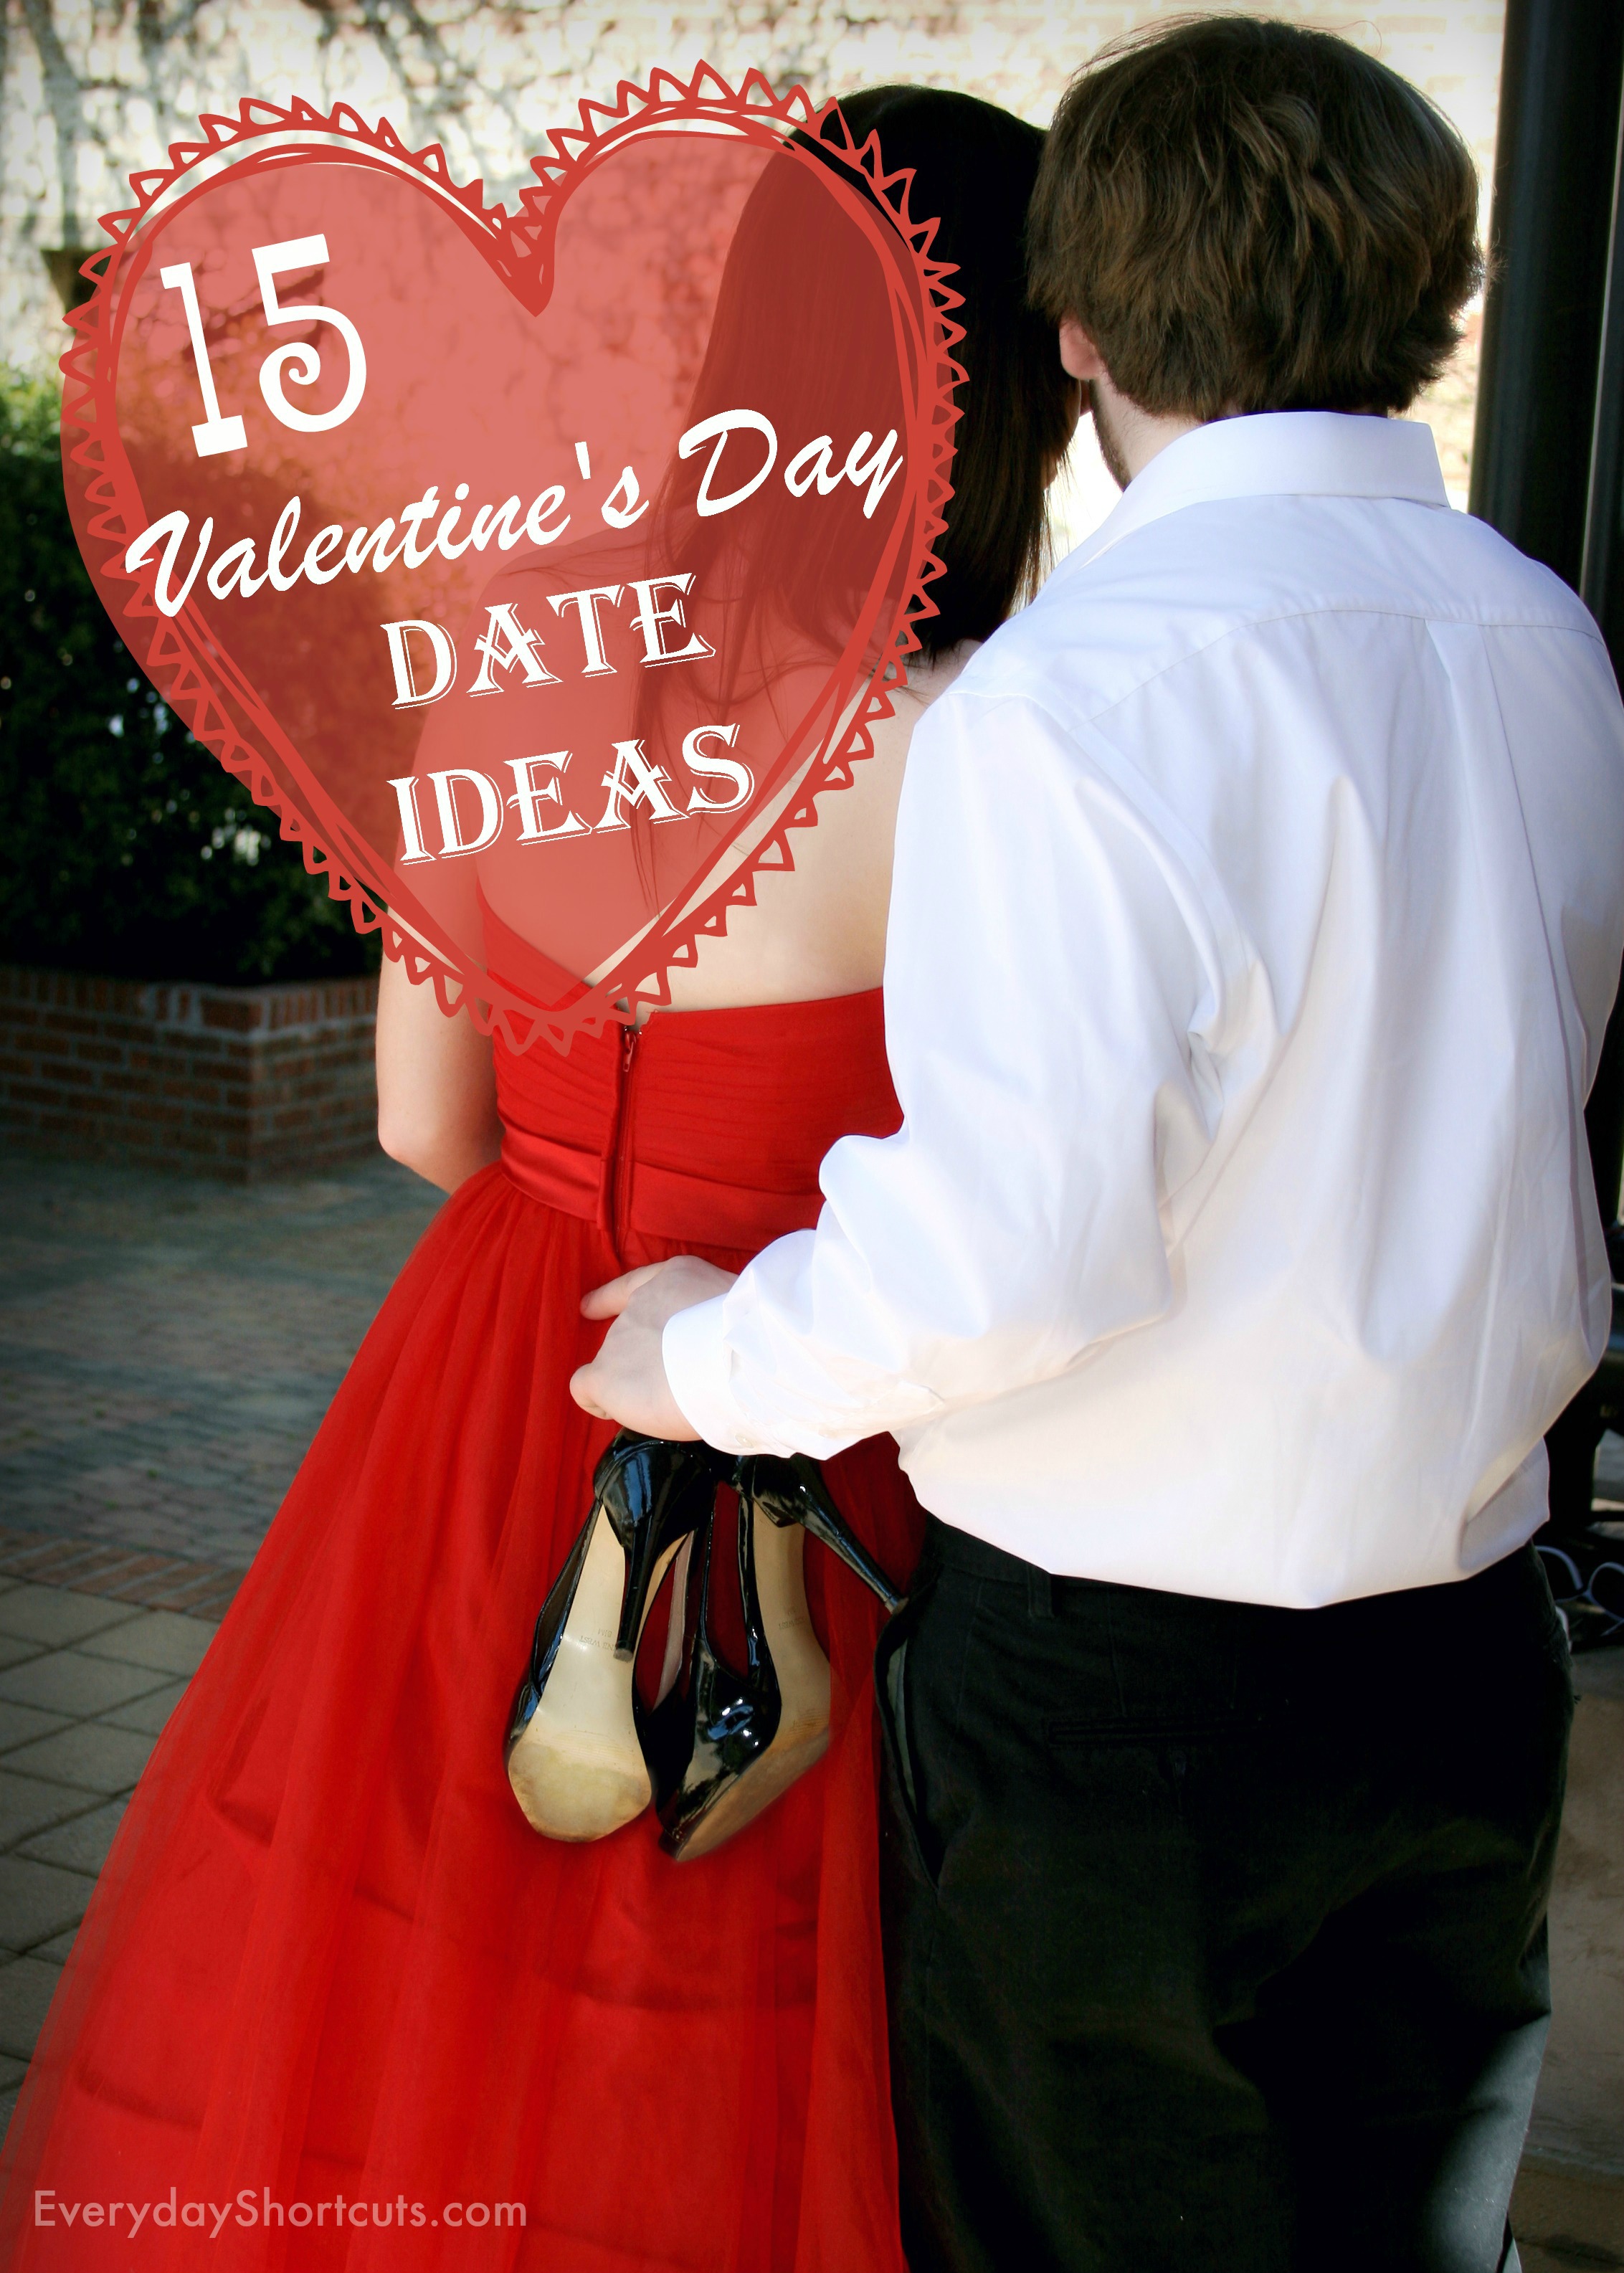 15 Valentine's Day Date Ideas Everyday Shortcuts